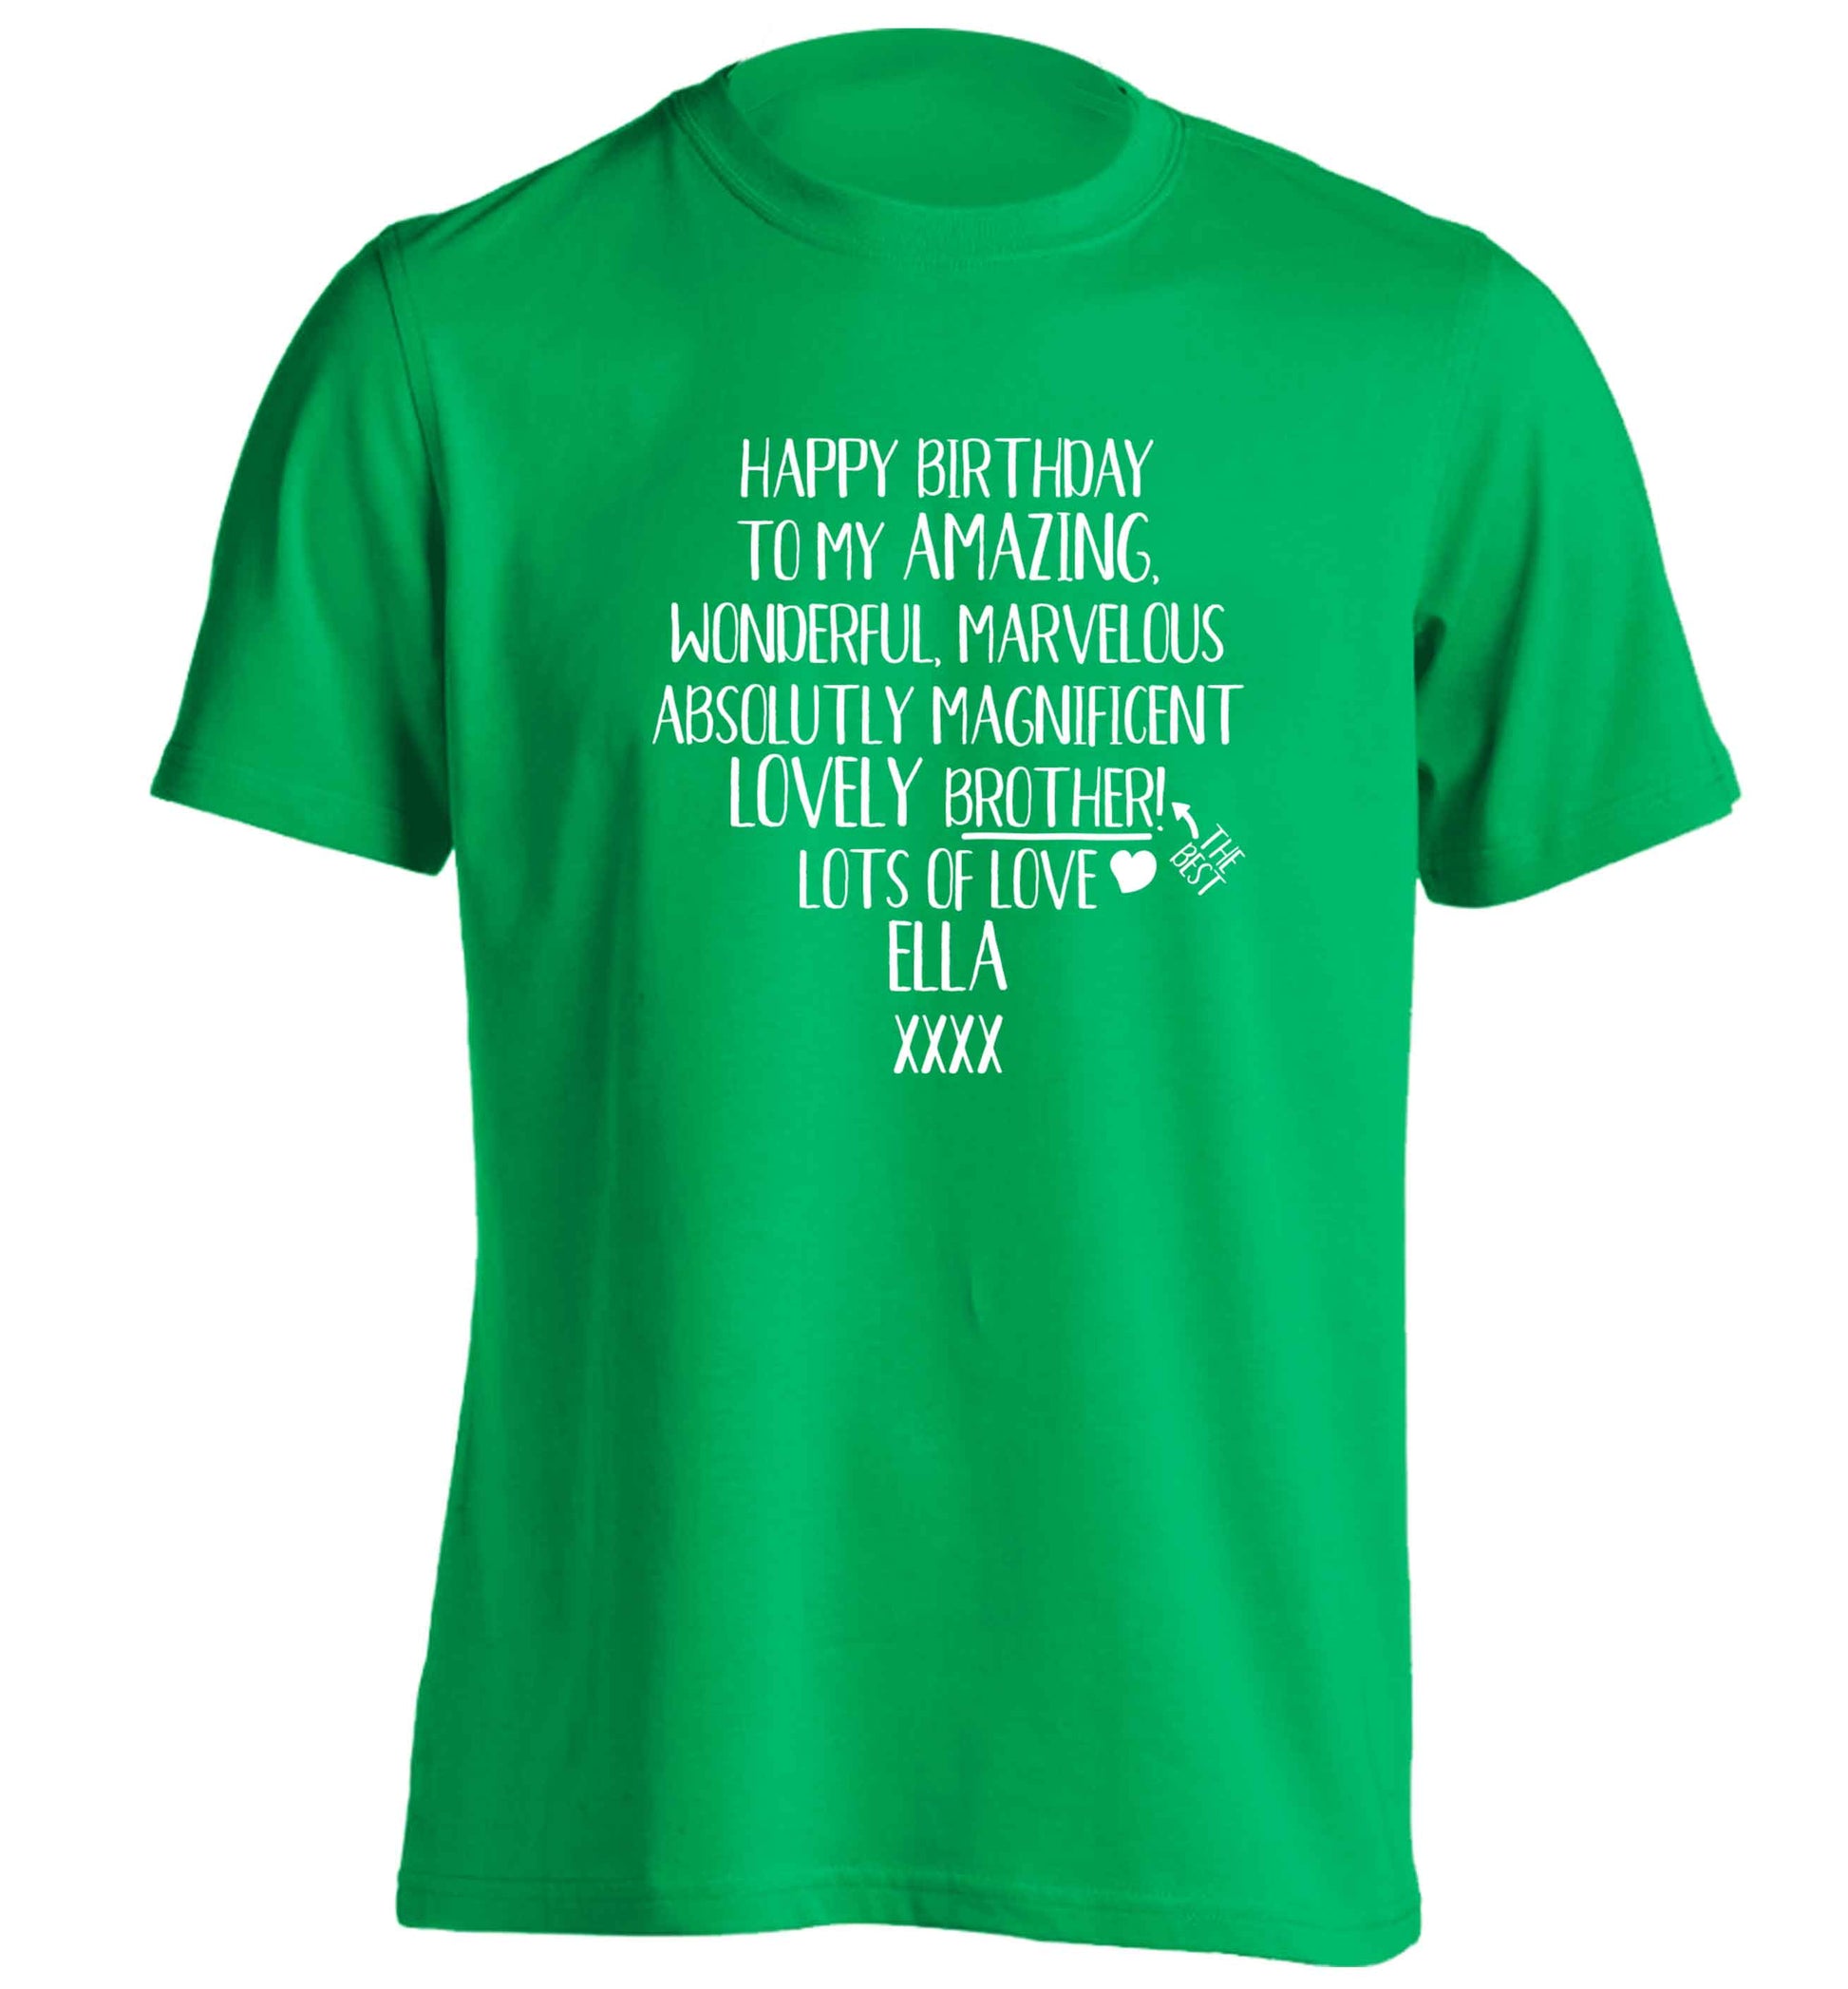 Personalised happy birthday to my amazing, wonderful, lovely brother adults unisex green Tshirt 2XL